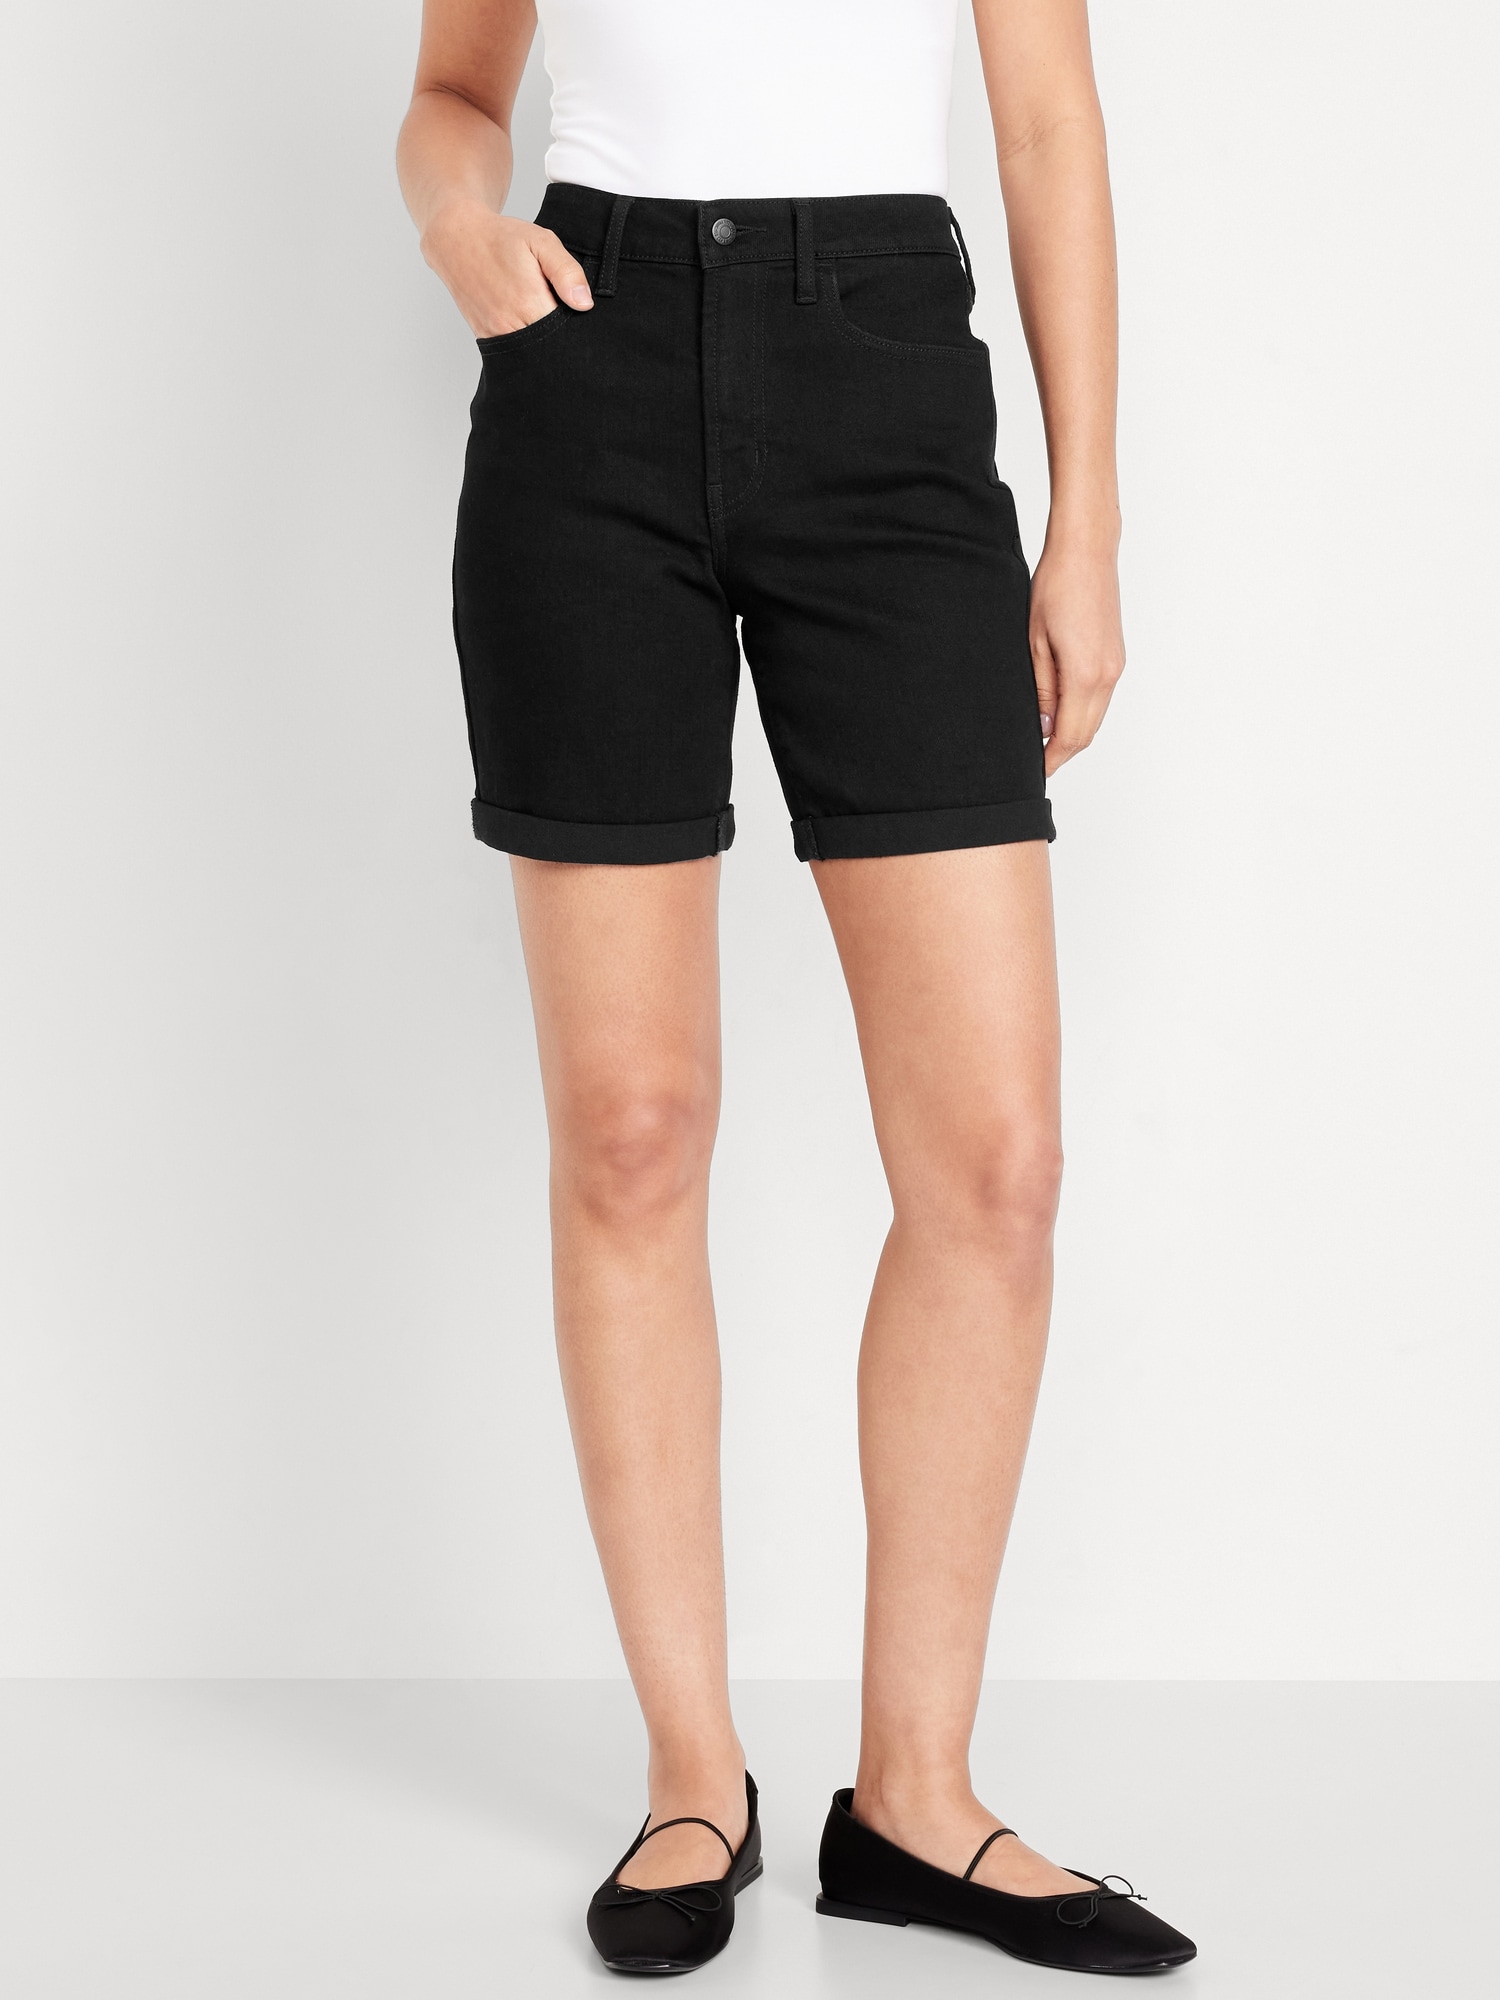 High-Waisted Wow Jean Shorts -- 7-inch inseam